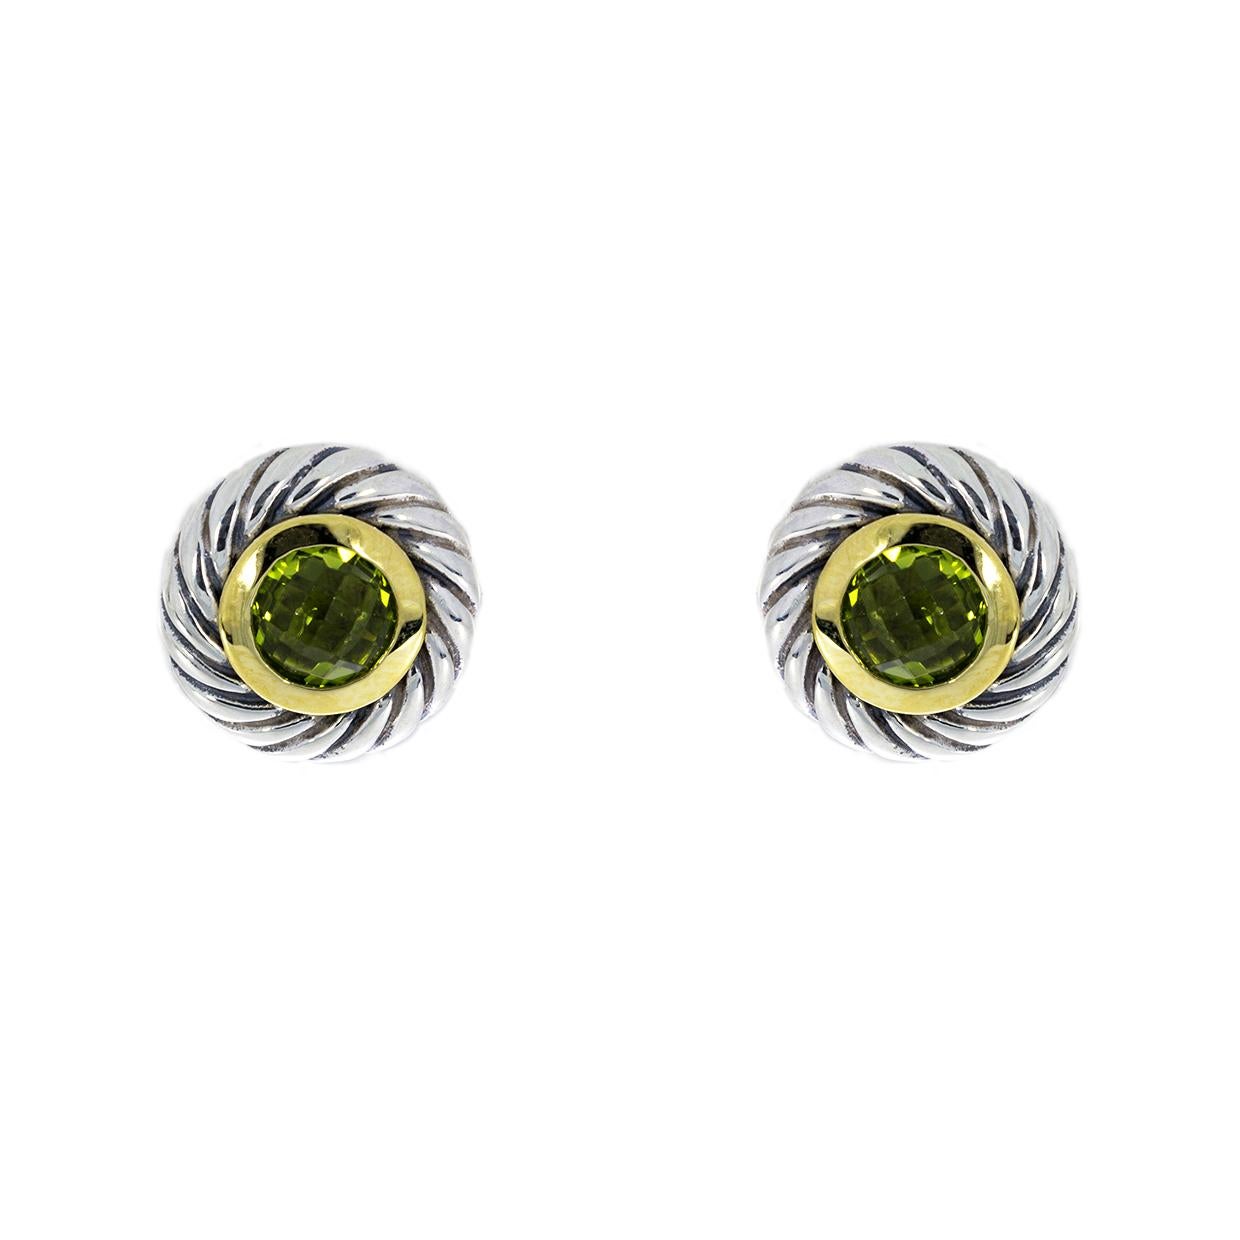 Item Details
Main Stone Shape Round Cut
Main Stone Treatment Not Enhanced
Main Stone Creation Natural
Main Stone Peridot
Main Stone Color Green
Estimated Retail $675.00
Brand David Yurman
Collection Cookie
Metal Mixed Metals
Style Stud
Fastening